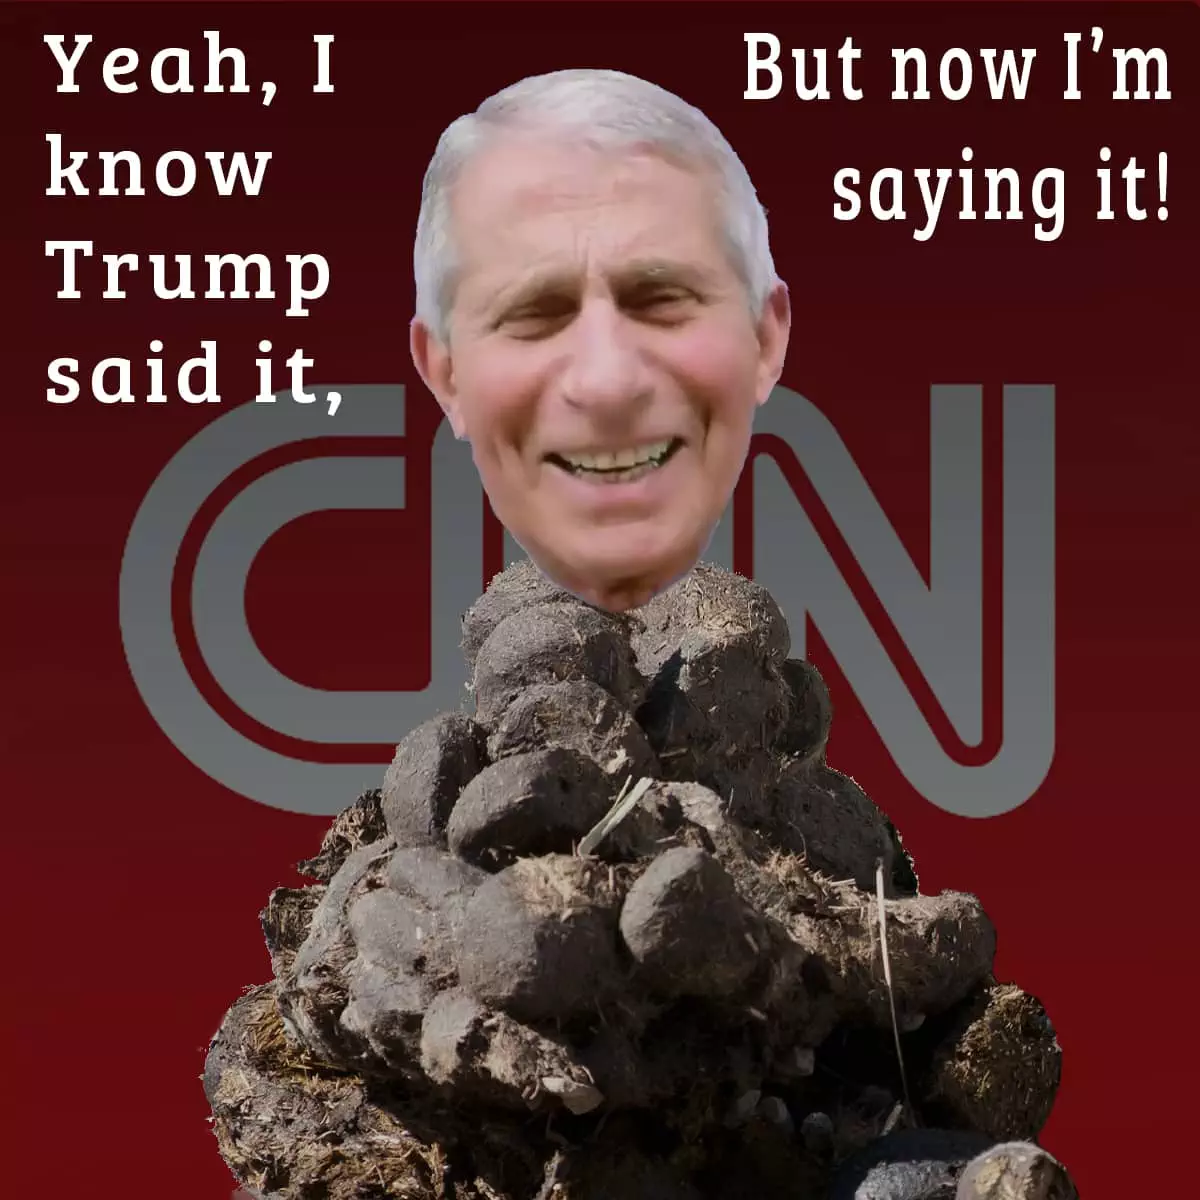 Fauci the Fraud – I know Trump said it, but now I’m saying it!